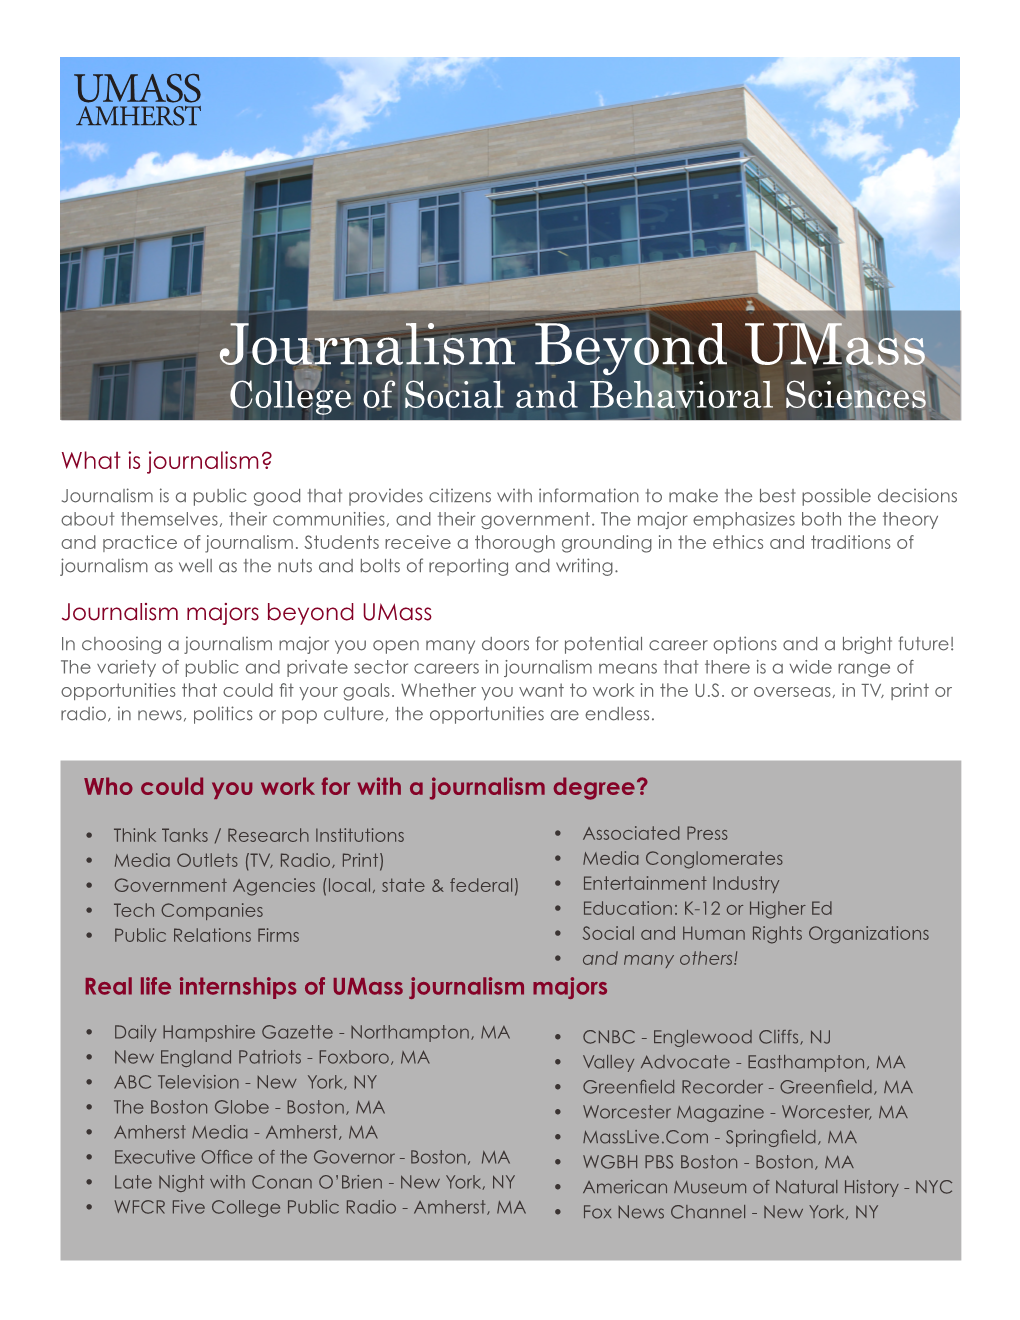 Journalism Beyond Umass College of Social and Behavioral Sciences